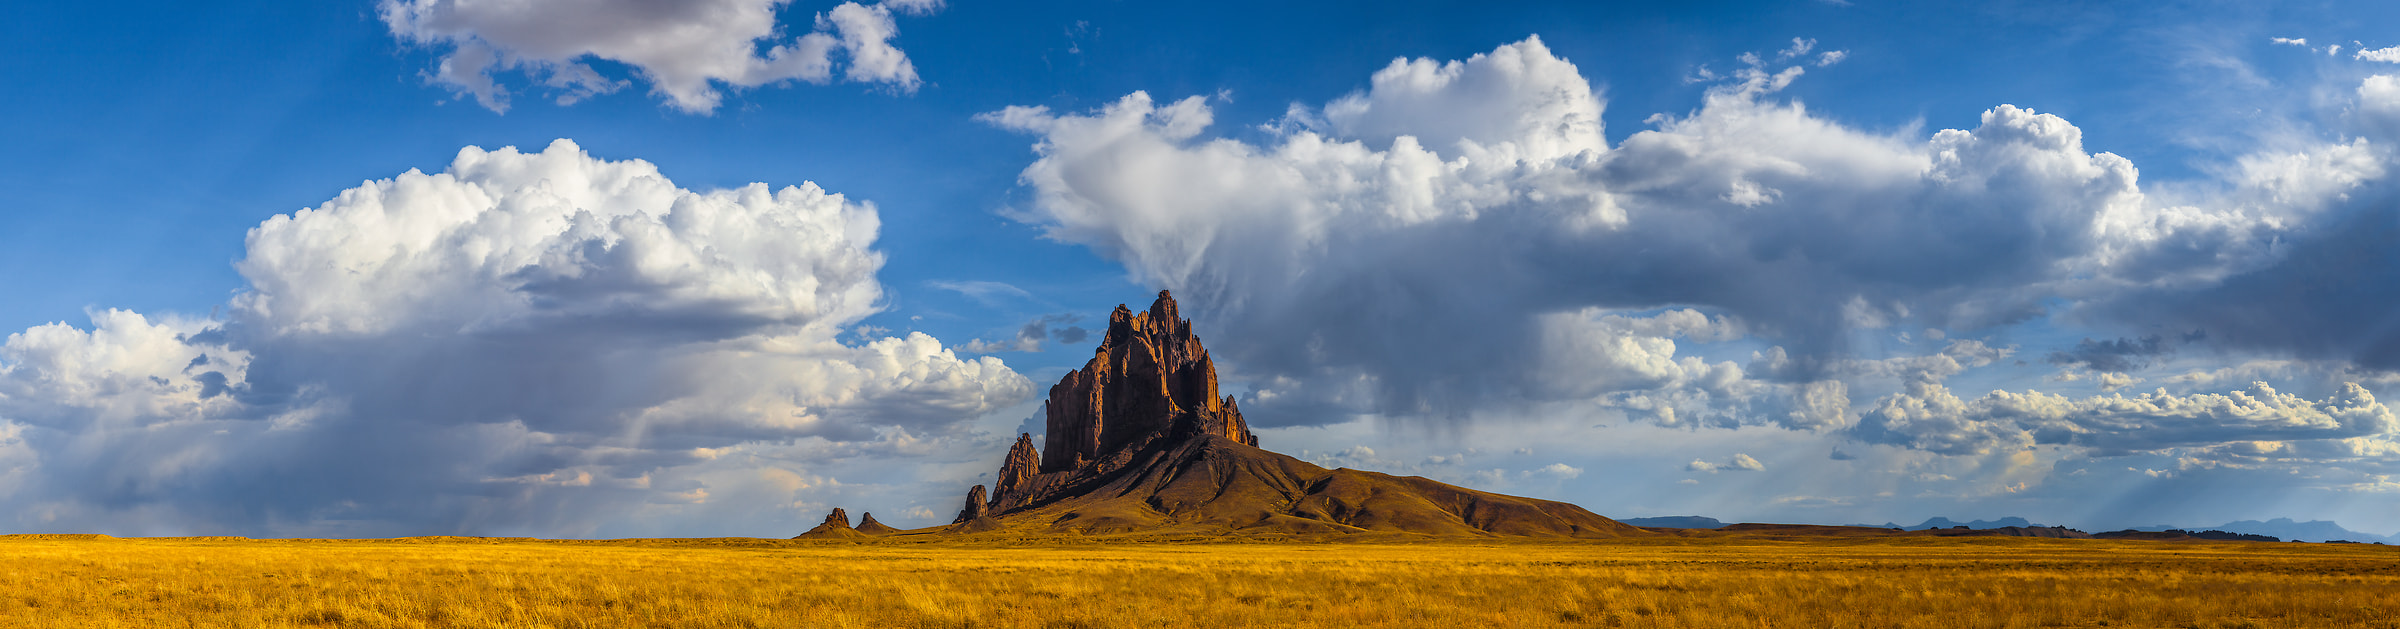 102 megapixels! A very high resolution, large-format VAST photo print of a rock formation in the American West; landscape photograph created by Phillip Noll in Shiprock, New Mexico.